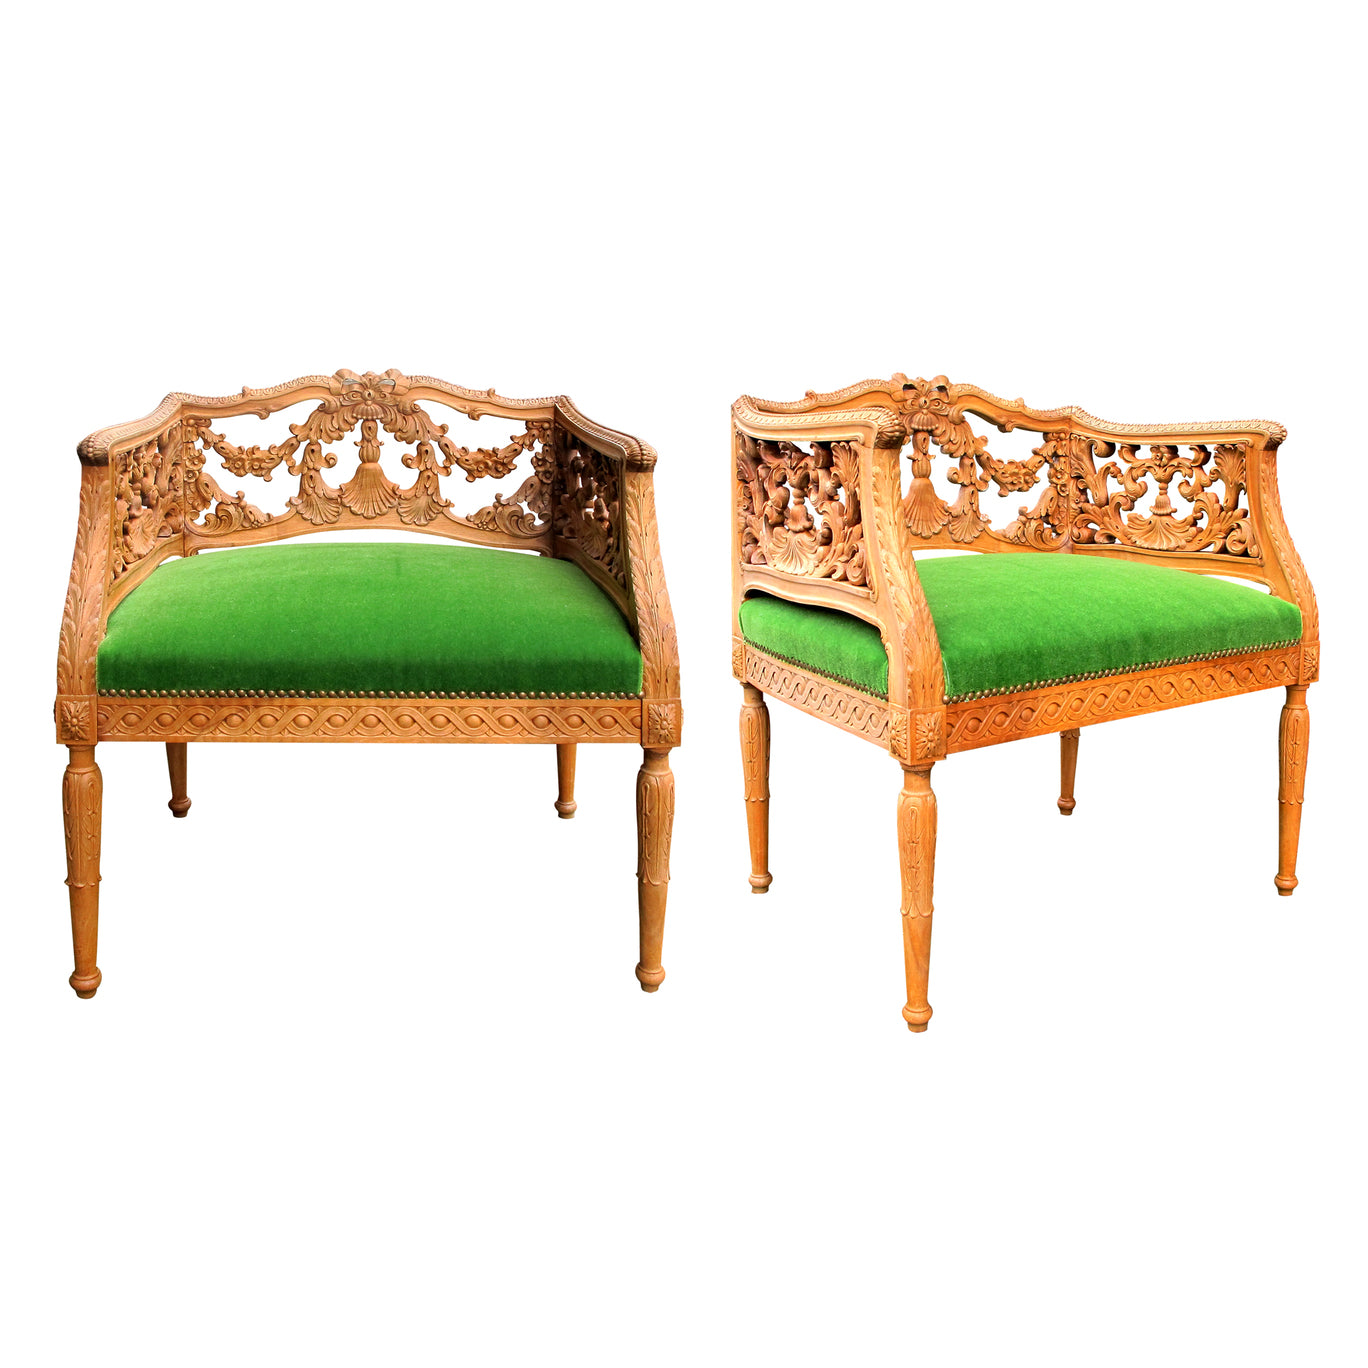 Early 1900s Swedish Pair of Armchairs with Carved Frame and Green Mohair Seats